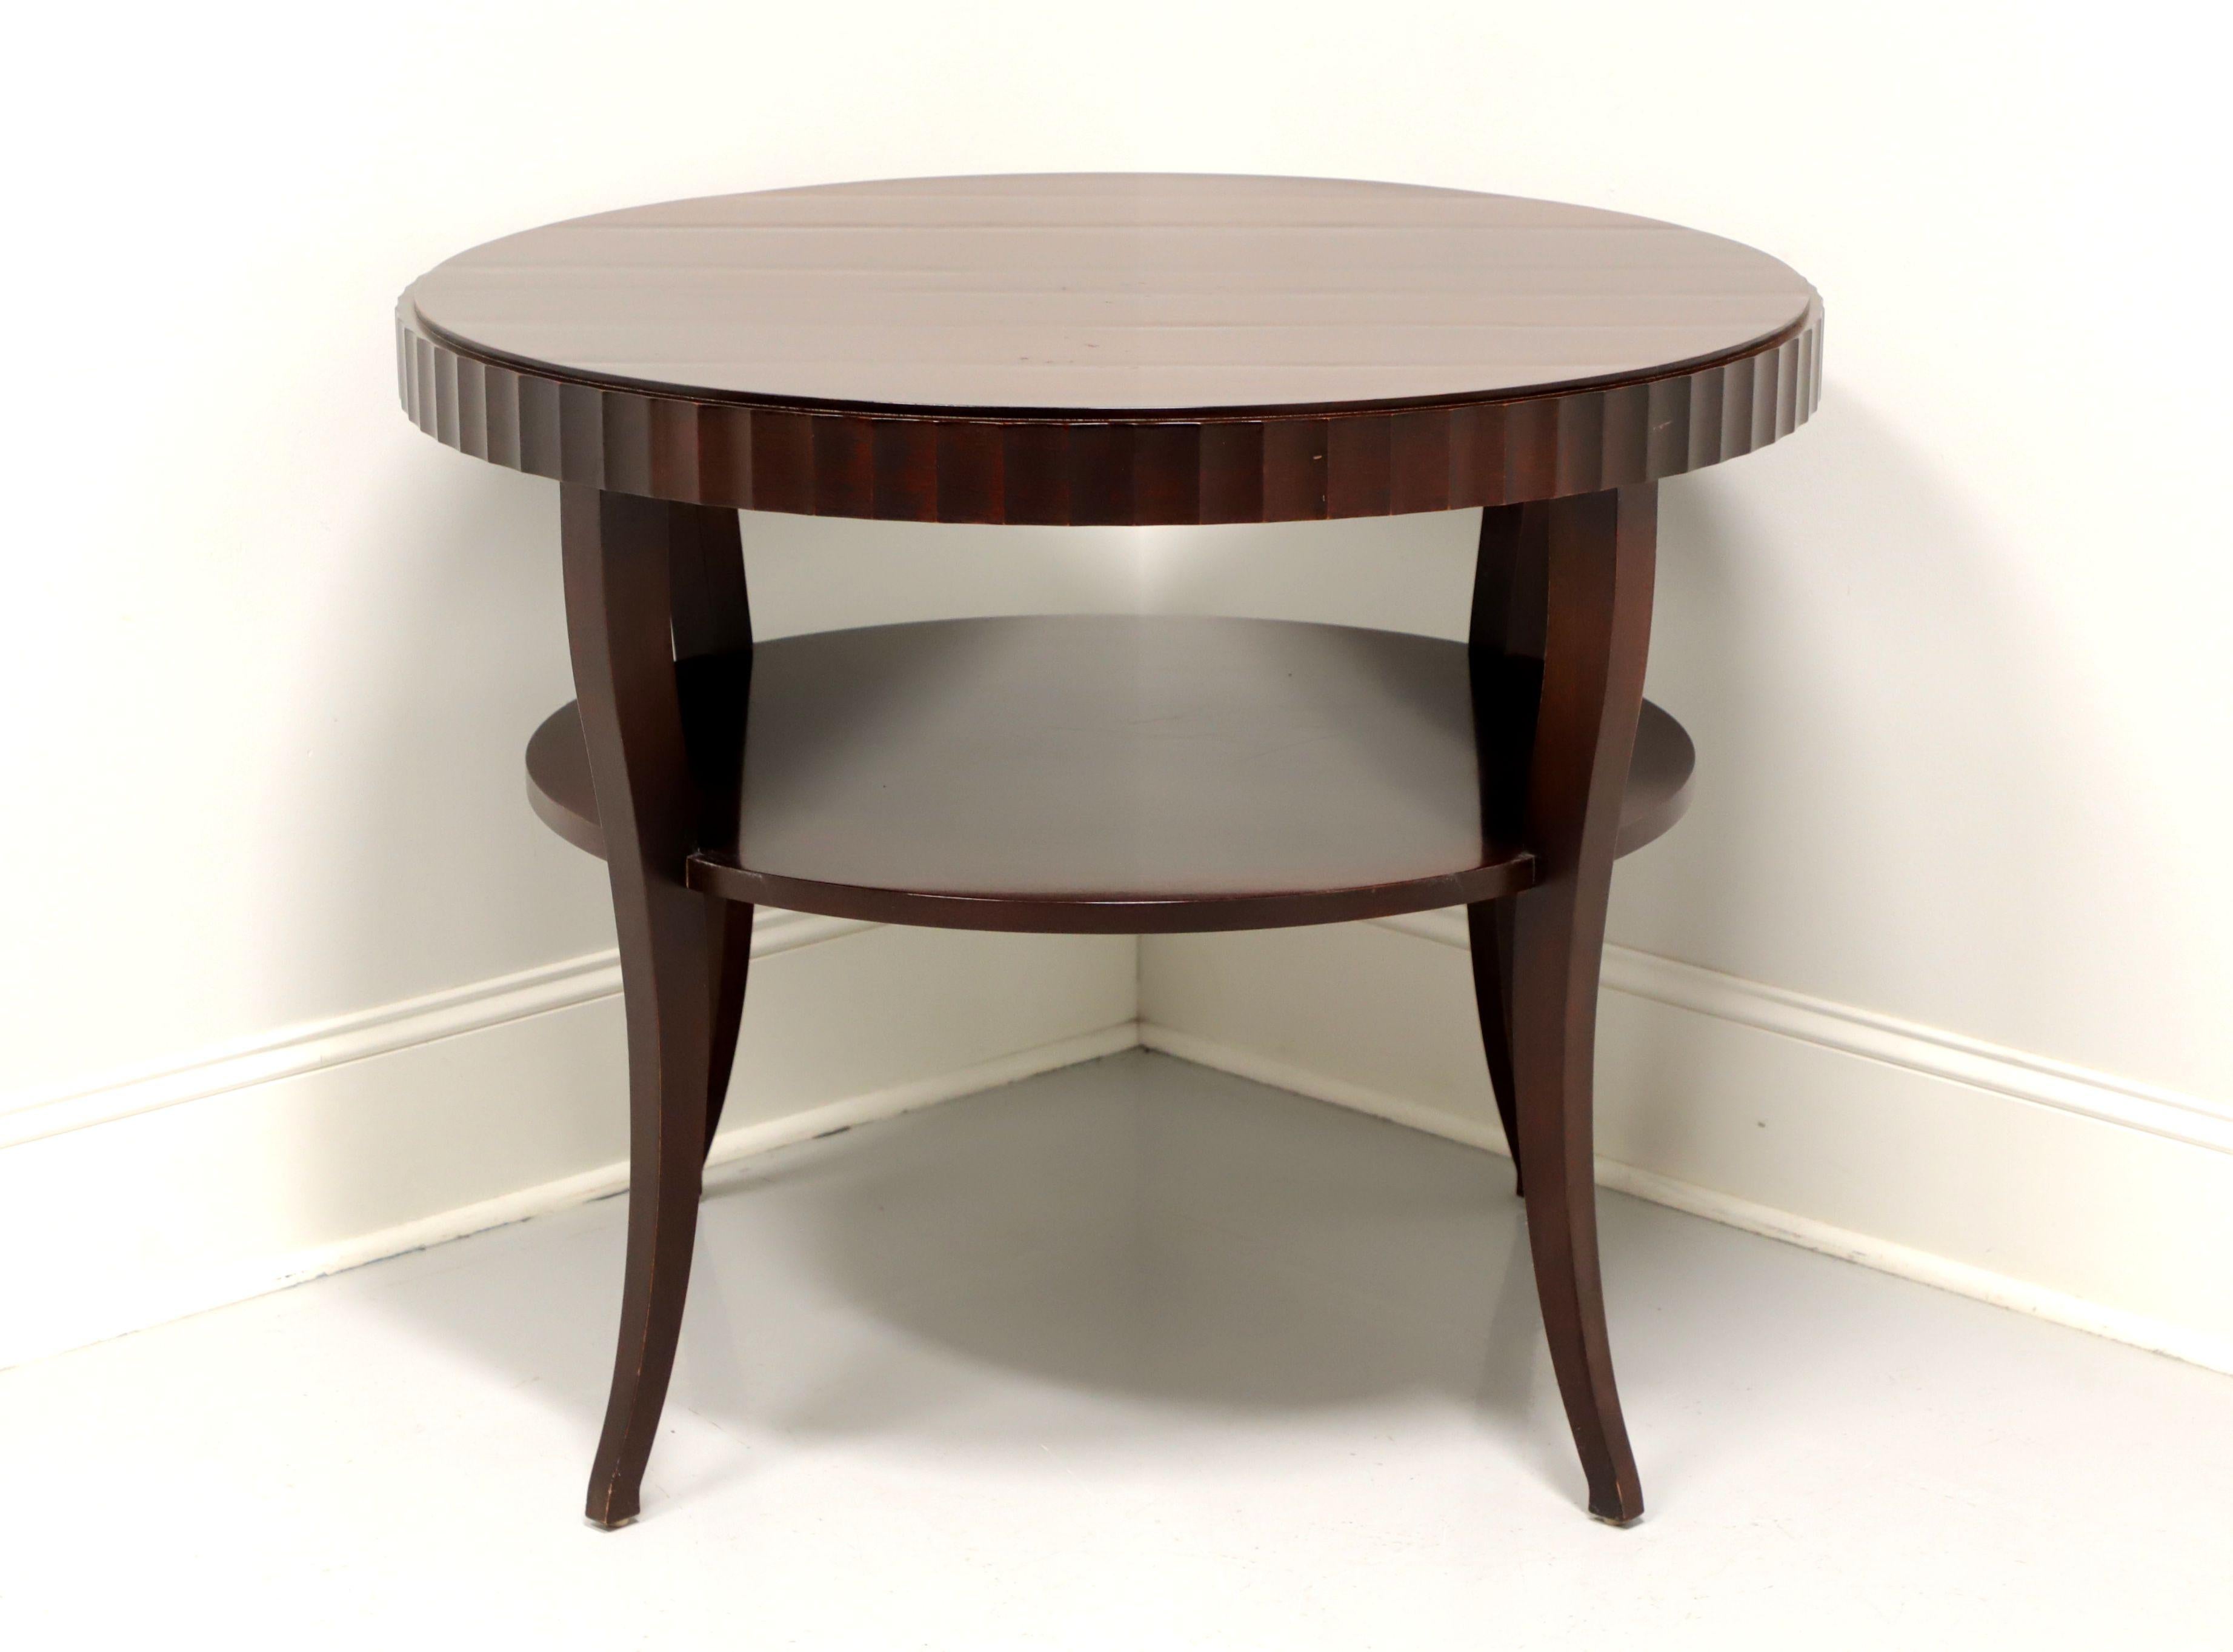 American Barbara Barry for BAKER Contemporary Mahogany Round Two-Tier Center Accent Table